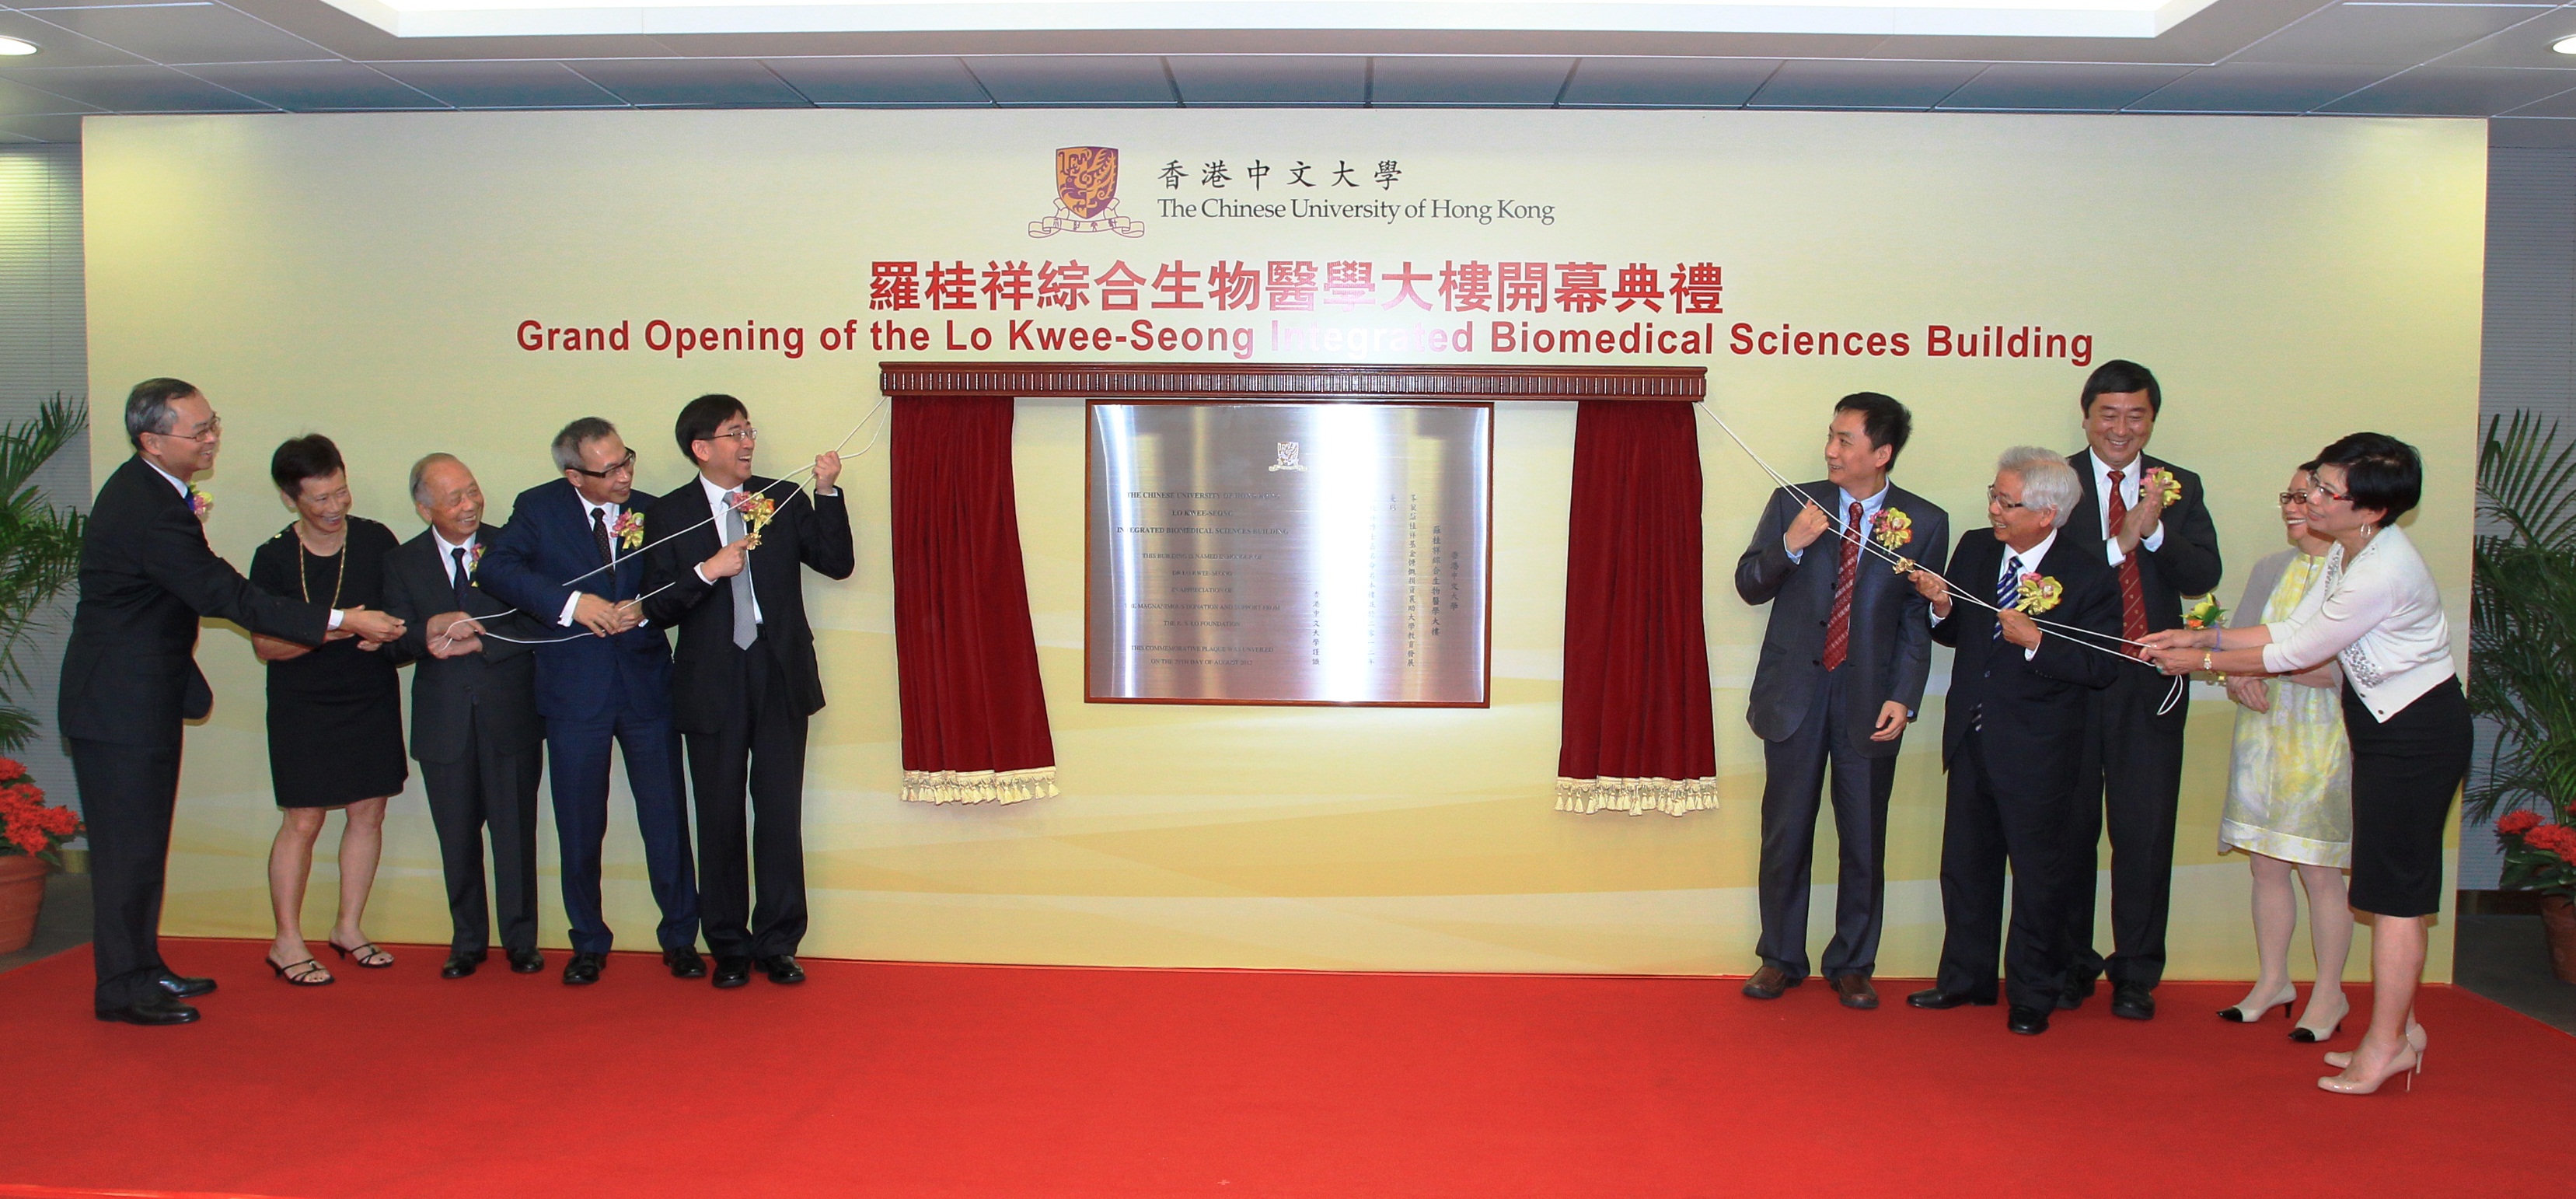 Officiating guests unveil the plaque of the building: (from left) Professor Fok Tai-fai, Dean of Medicine, CUHK; Mrs. Chan Lo Mo-lin, Irene, Trustee, K. S. Lo Foundation; Mr. Lo Kai-tun, Trustee, K. S. Lo Foundation; Dr. Lo Tak-shing, Peter, Chairman, K. S. Lo Foundation; Dr. the Honorable Ko Wing-man, Secretary for Food and Health, Hong Kong Special Administrative Region; Mr. Wang Zhutian, Assistant Director, China National Center for Food Safety Risk Assessment; Mr. Lo Yau-lai, Winston, Executive Chairman, Vitasoy International Holdings Ltd.; Professor Joseph J. Y. Sung, Vice-Chancellor and President, CUHK; Ms. Lo Mo-ching, Myrna, Trustee, K. S. Lo Foundation; and Ms. Lo Mo-ling, Yvonne, Trustee, K. S. Lo Foundation